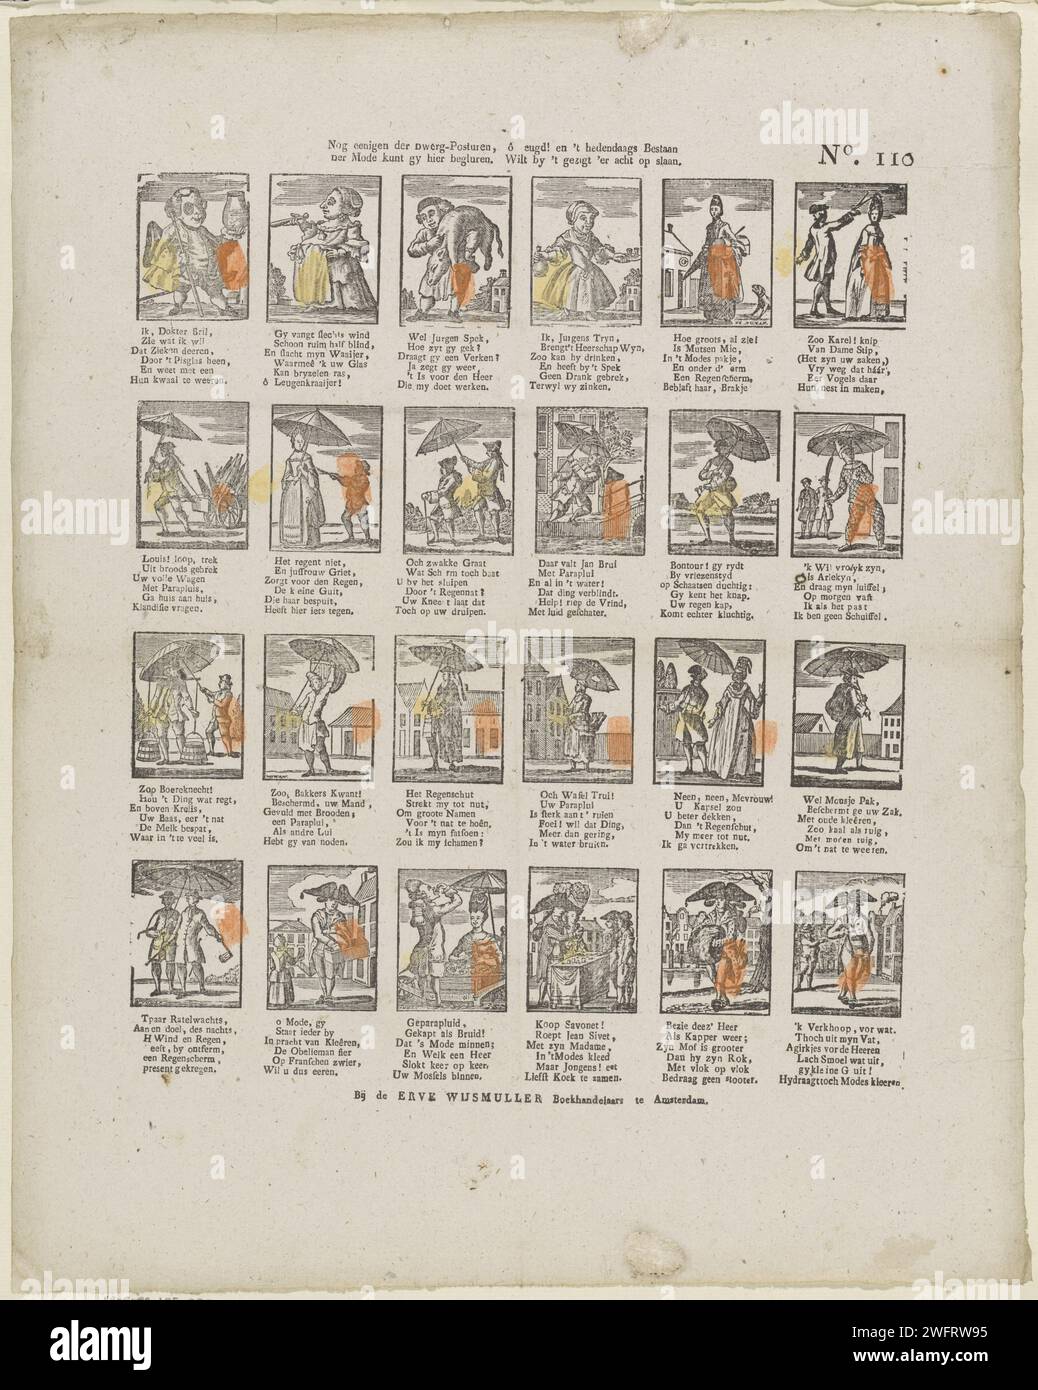 Some of the dwarf post hours, ô Youth! And the contemporary existence / Der Fashion can glide here. Want by 't Gezigt' It is eight, 1806 - 1830 print Cartoon on fashion with 24 performances of a men, women and caricature figures with parasols. A six -line verse under each image. Numbered at the top right: No. 110. Amsterdampublisher: Zaltbommelprint Maker: Netherlands paper letterpress printing fashion. fashion, clothing. parasol, sunshade. caricatures (human types). comedy Stock Photo